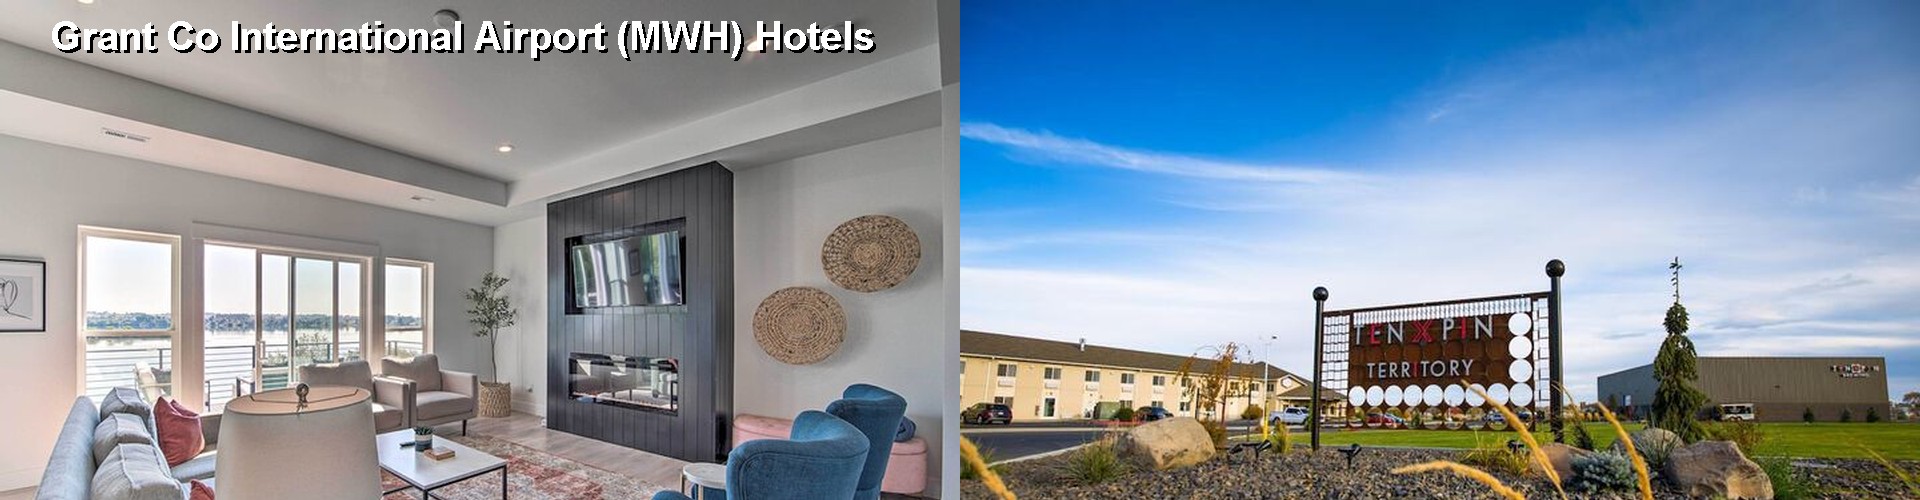 5 Best Hotels near Grant Co International Airport (MWH)